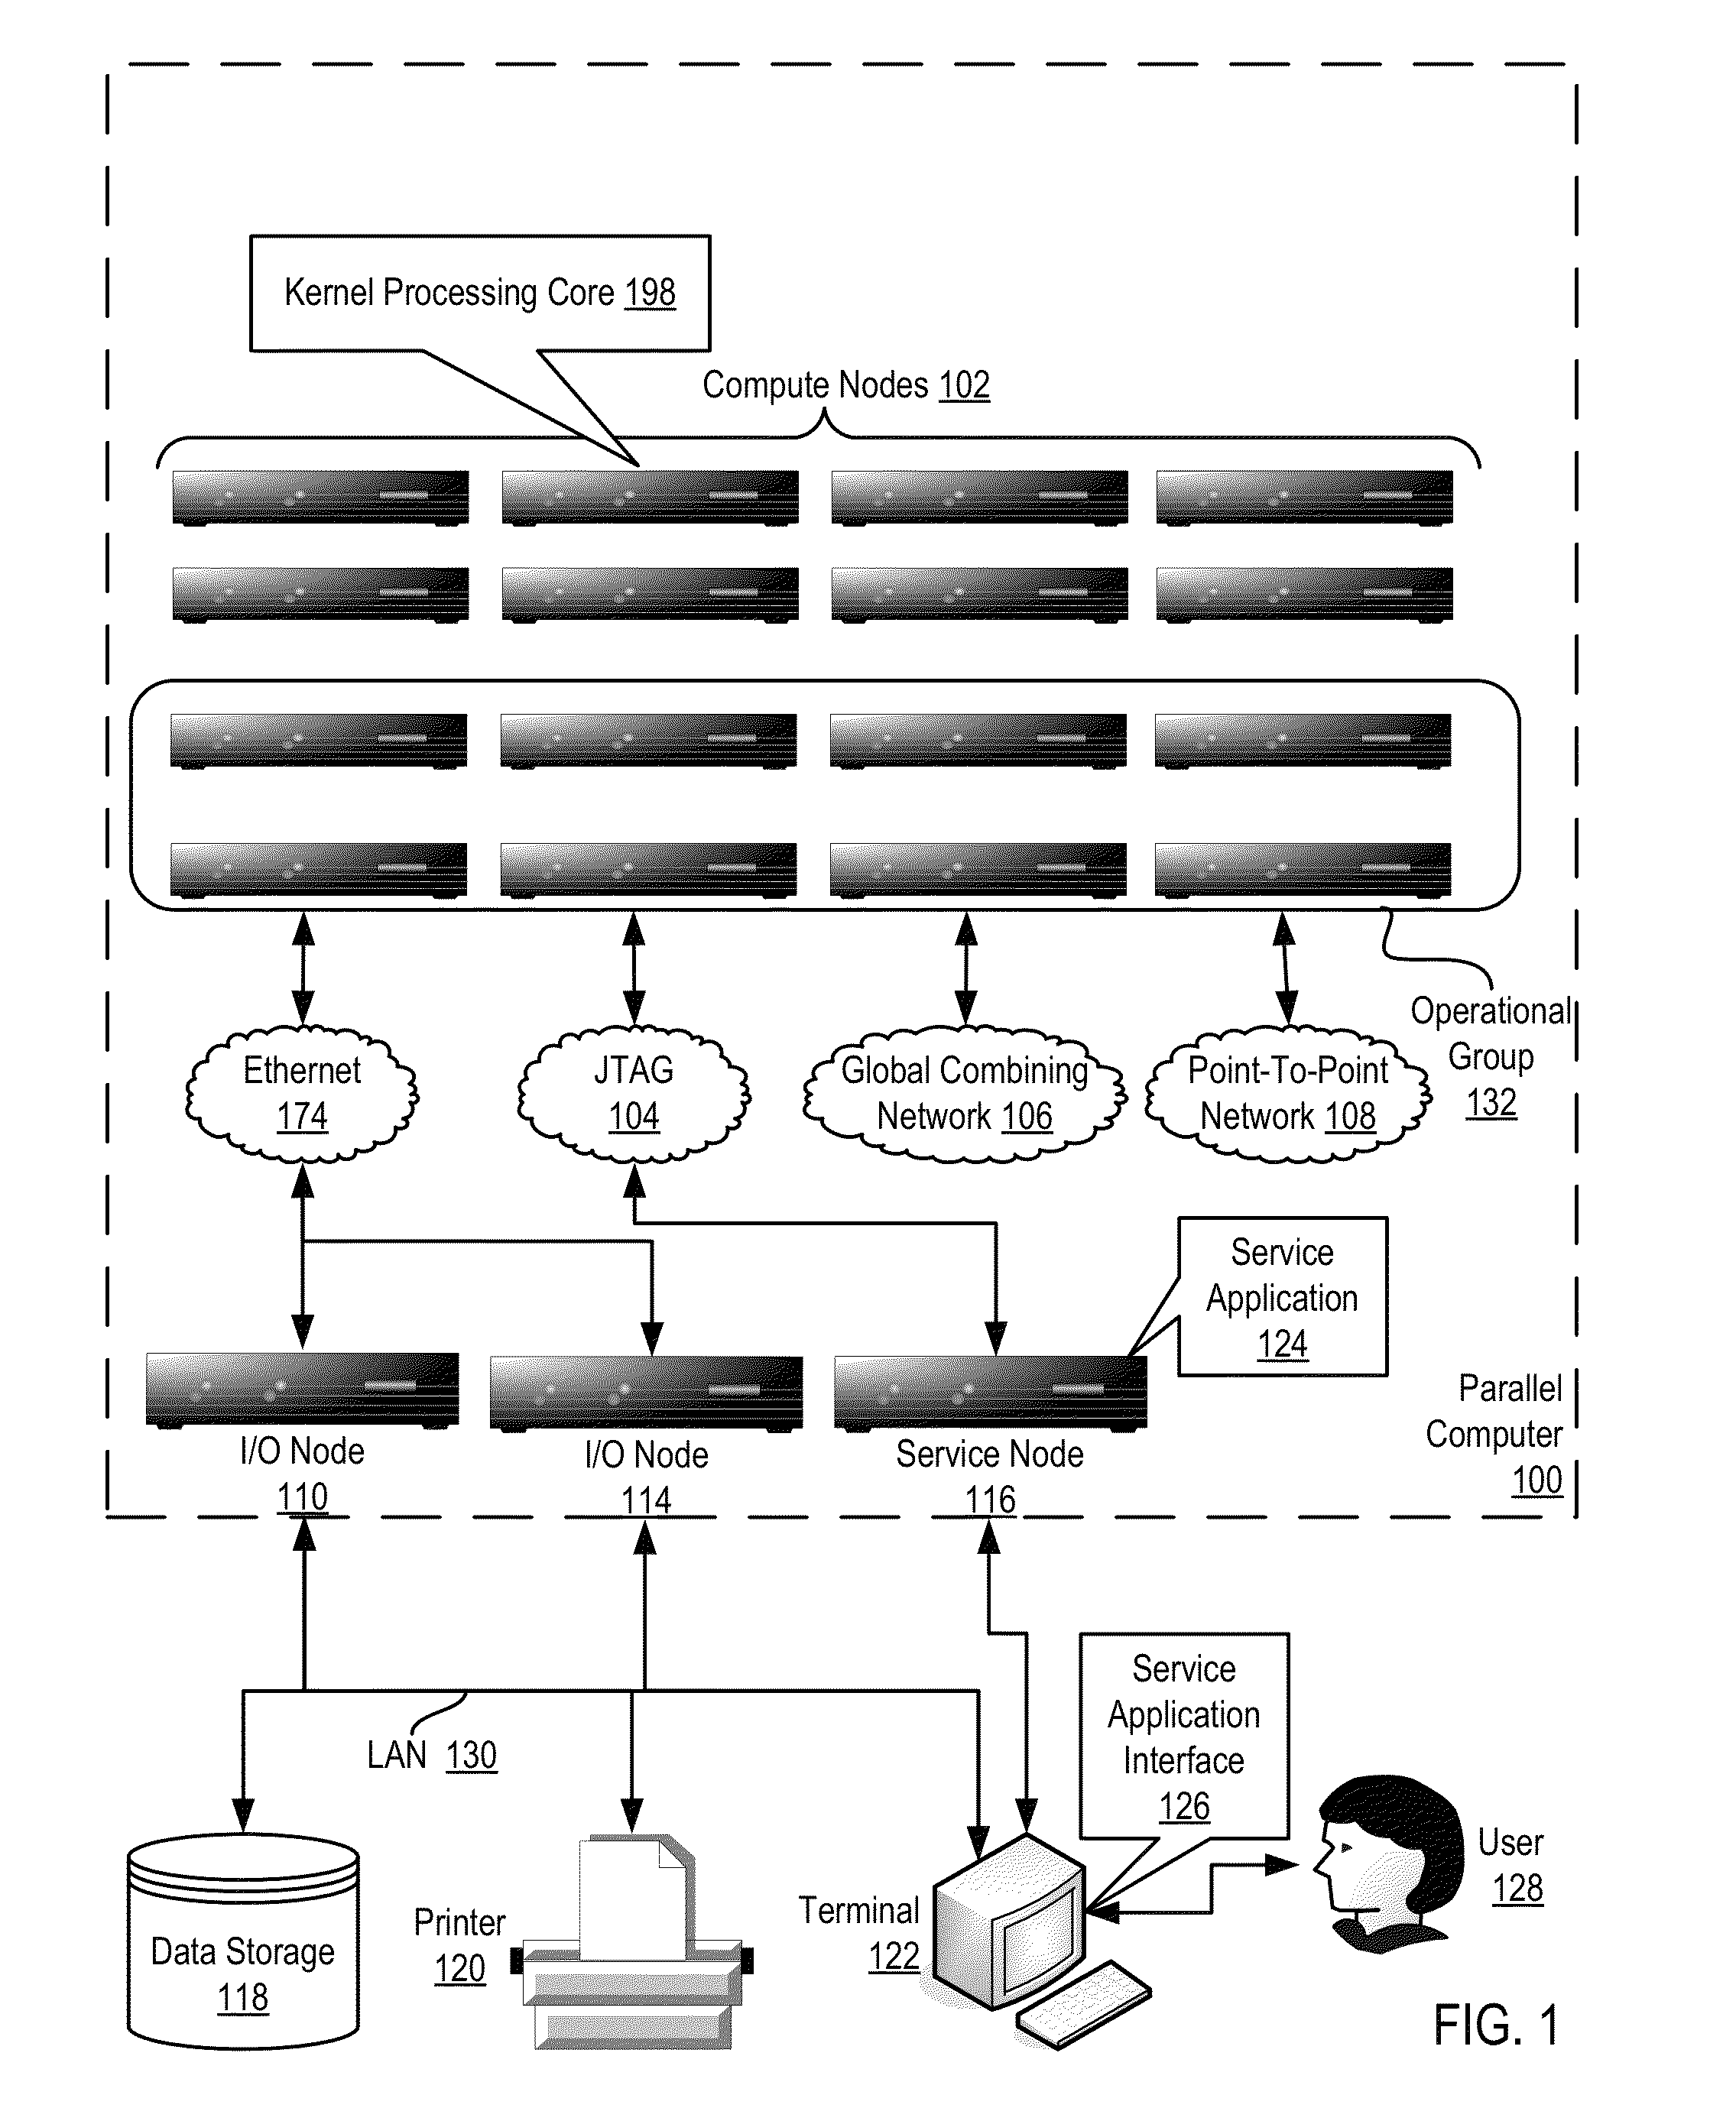 Utilizing a kernel administration hardware thread of a multi-threaded, multi-core compute node of a parallel computer